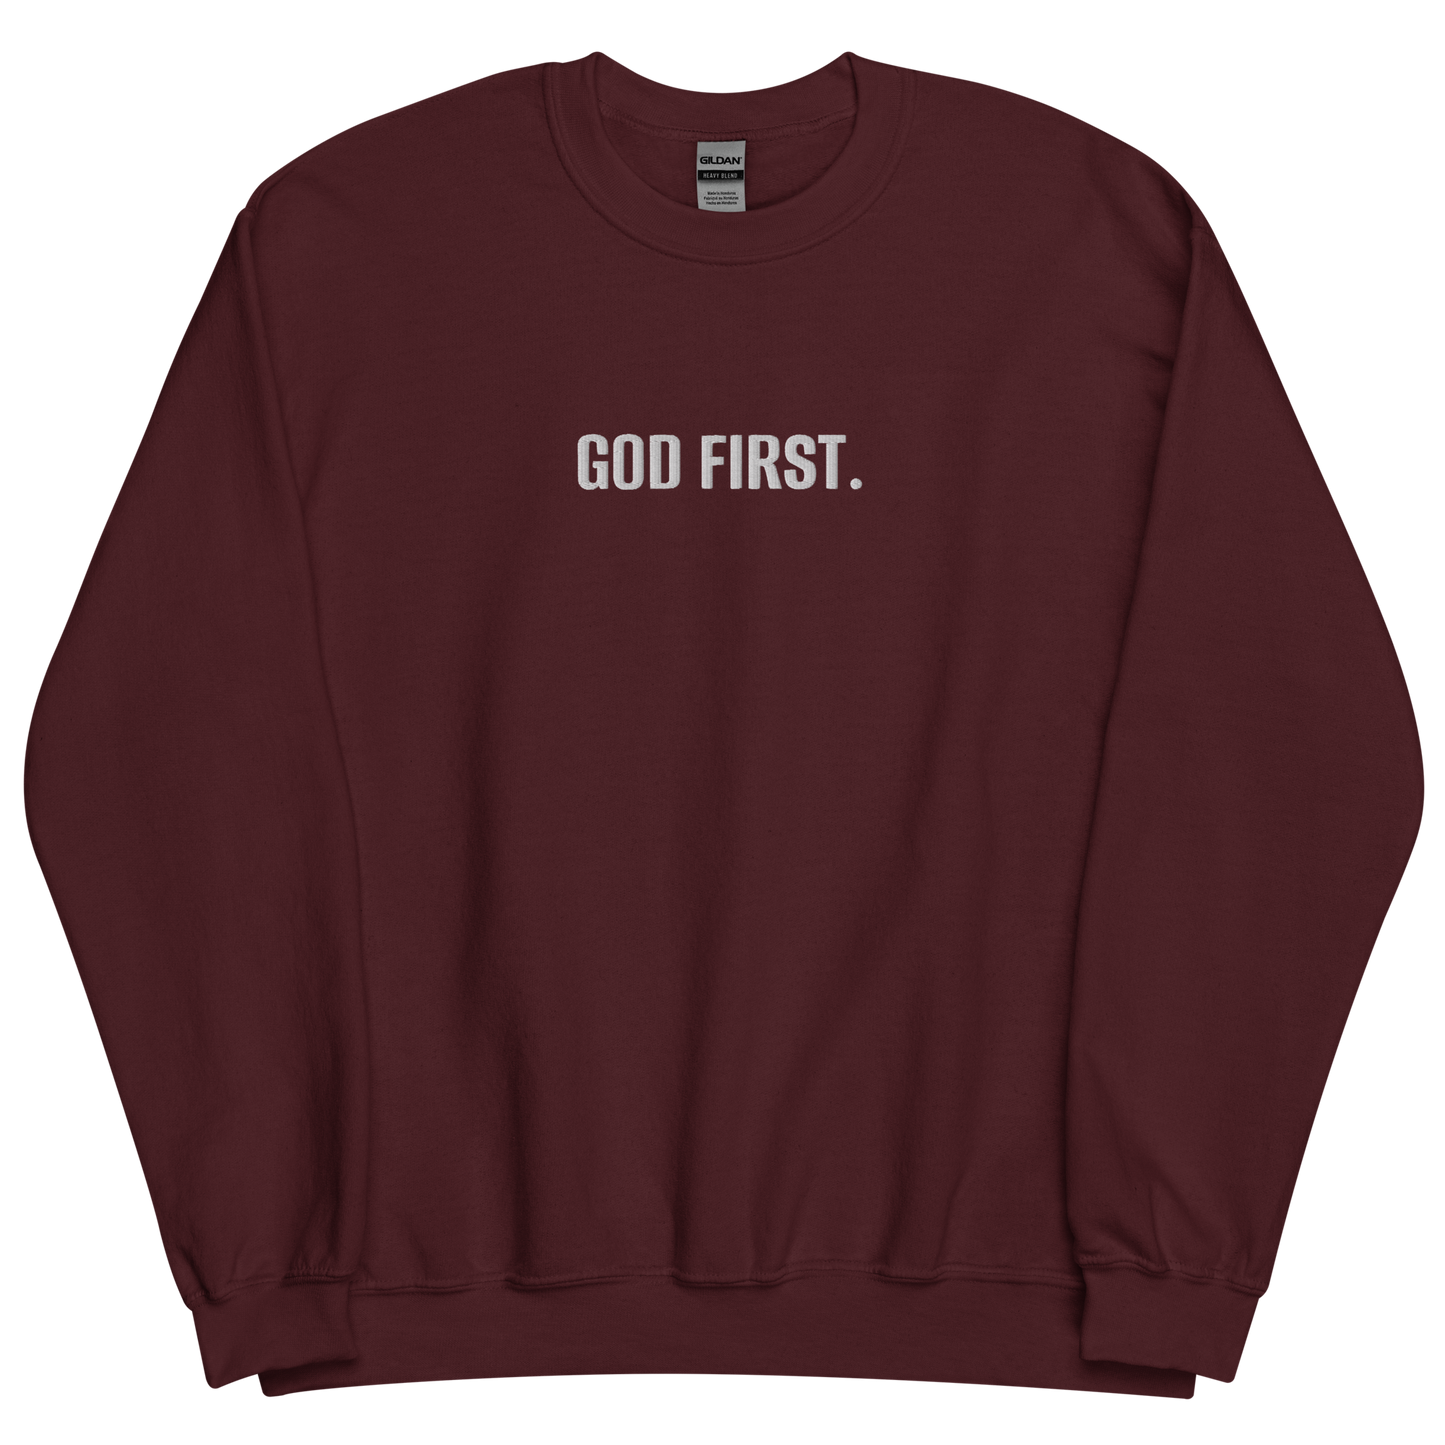 God First. sweatshirt with white embroidery